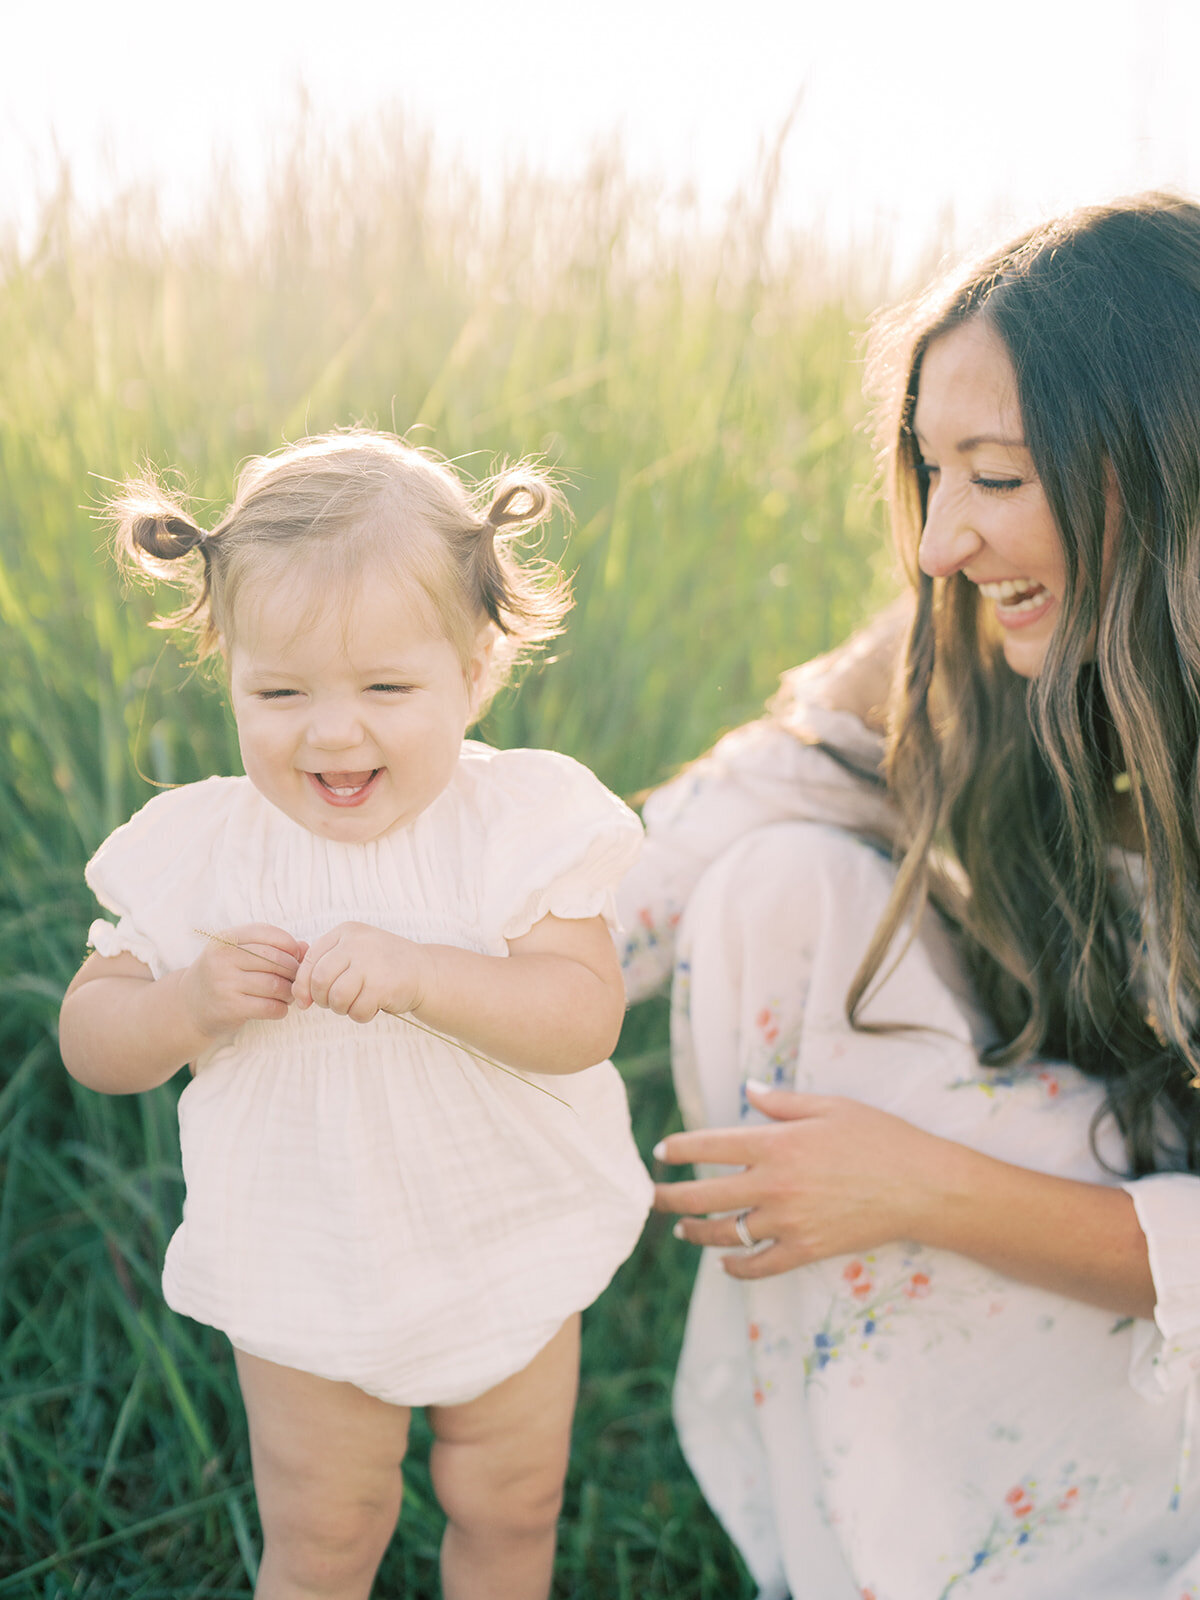 Mother with long brown hair crouches down next to her toddler daughter in pigtails in a grassy field.